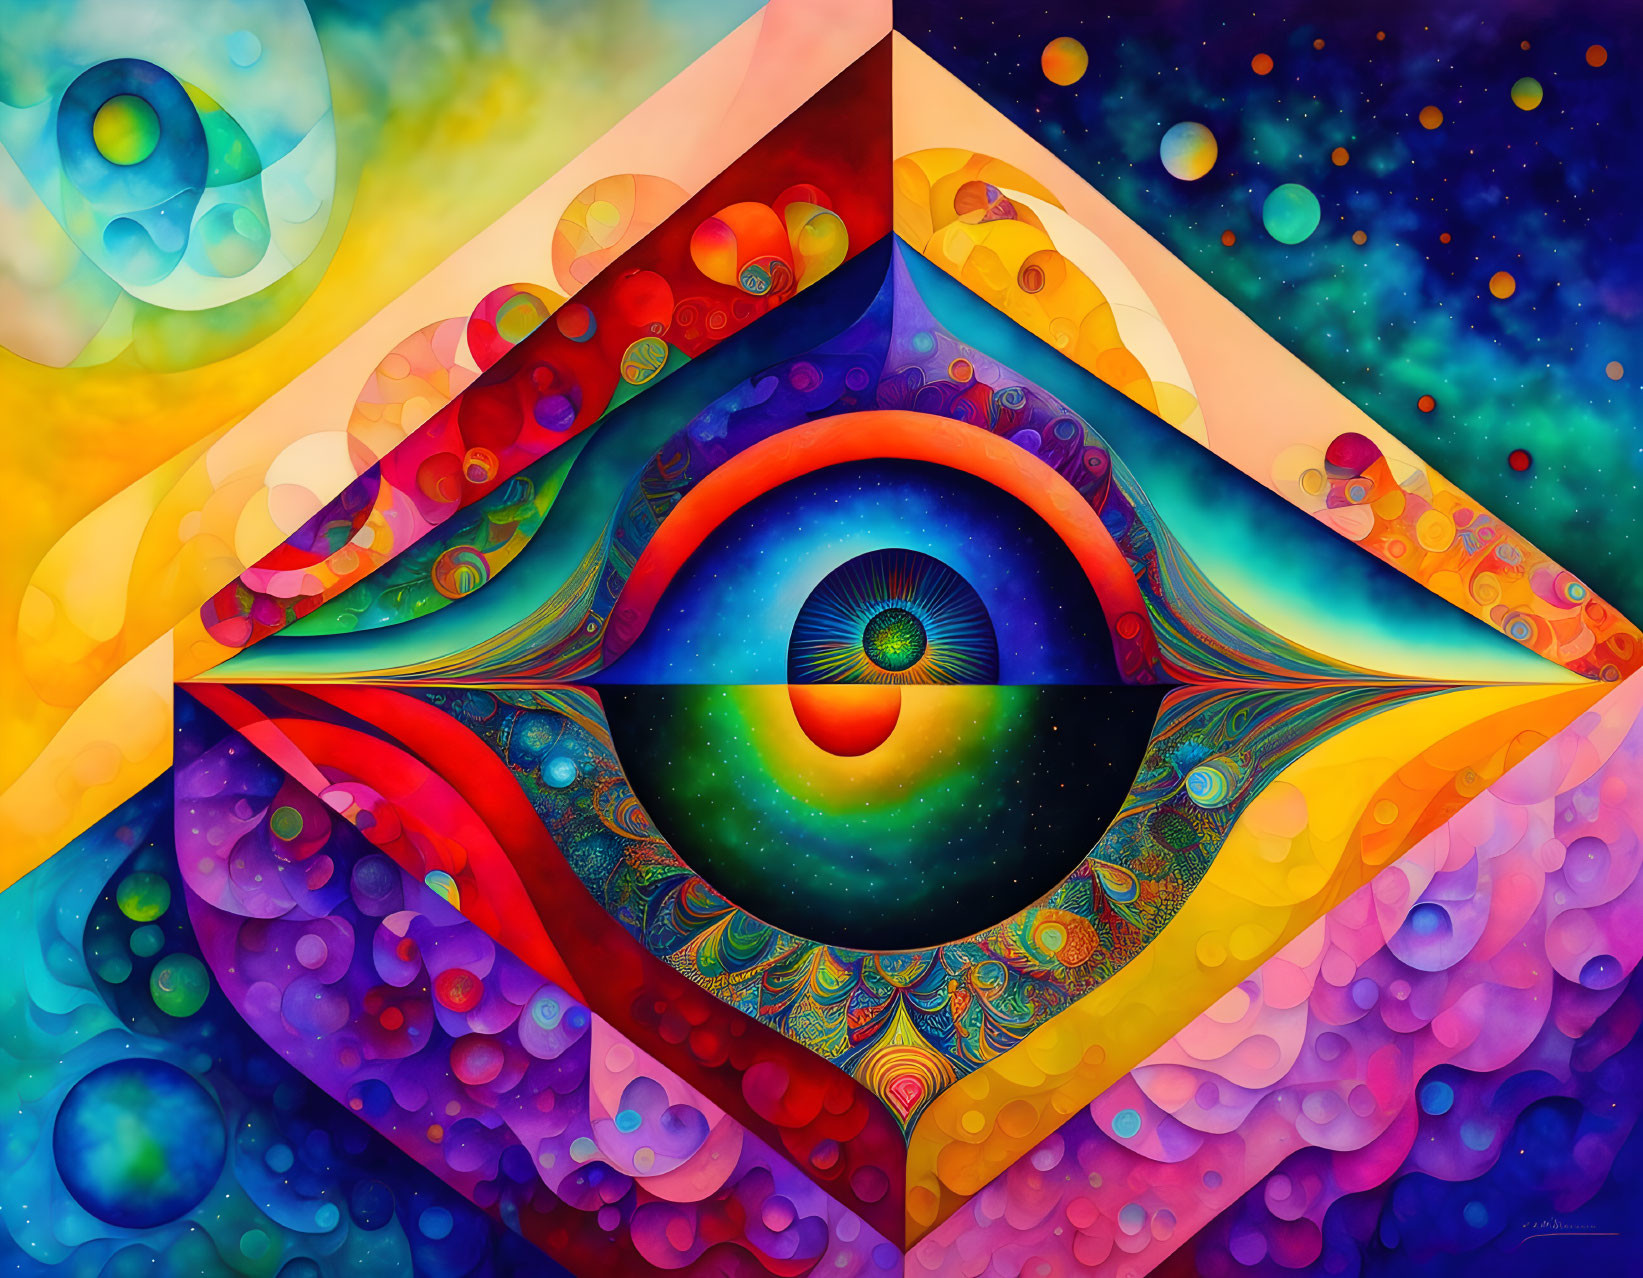 The eye of the universe